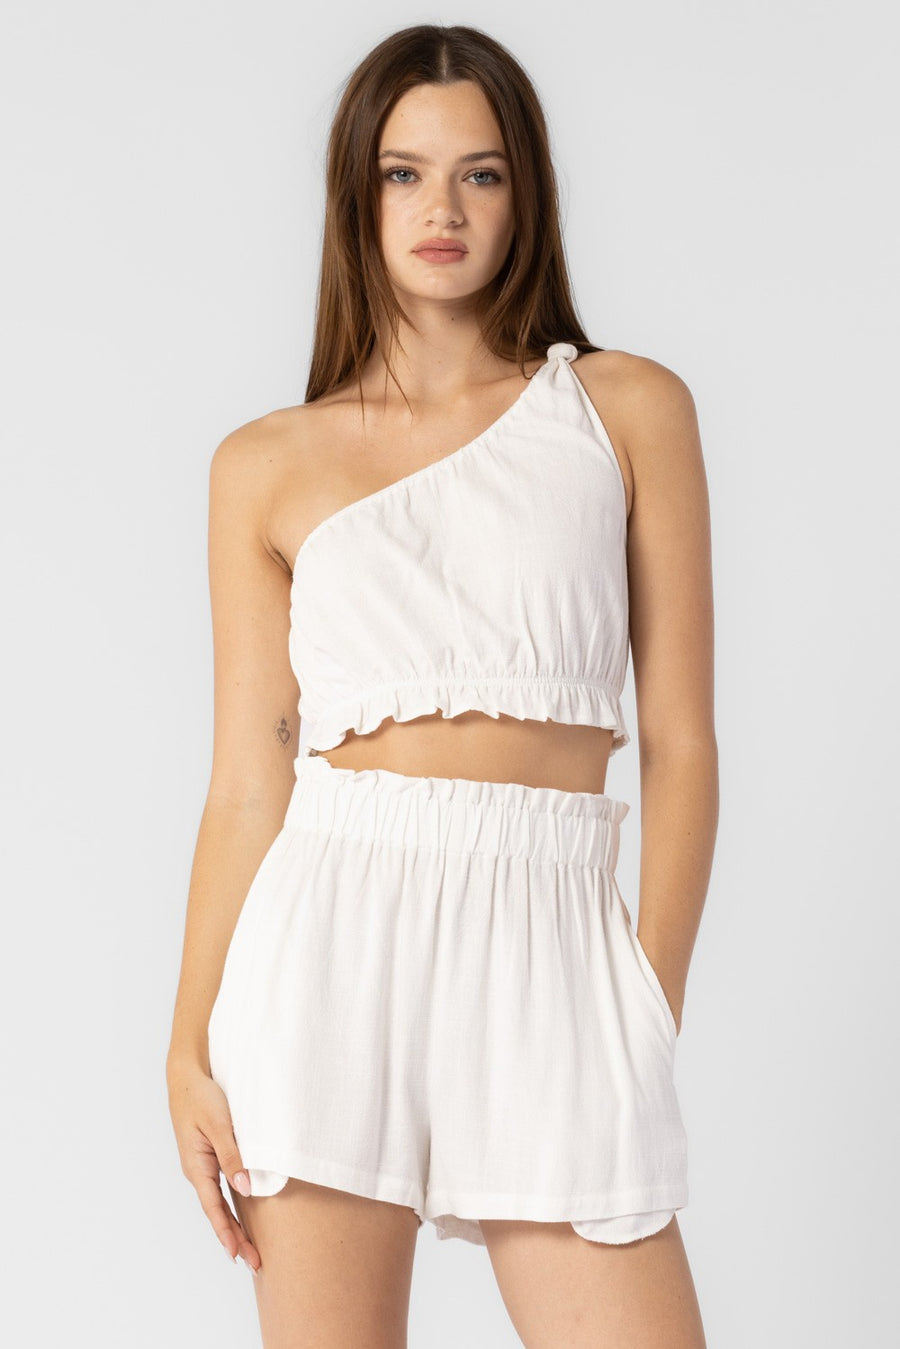 Featuring a one shoulder knot crop top with ruffle detailing. Best paired with the matching Logan Shorts.